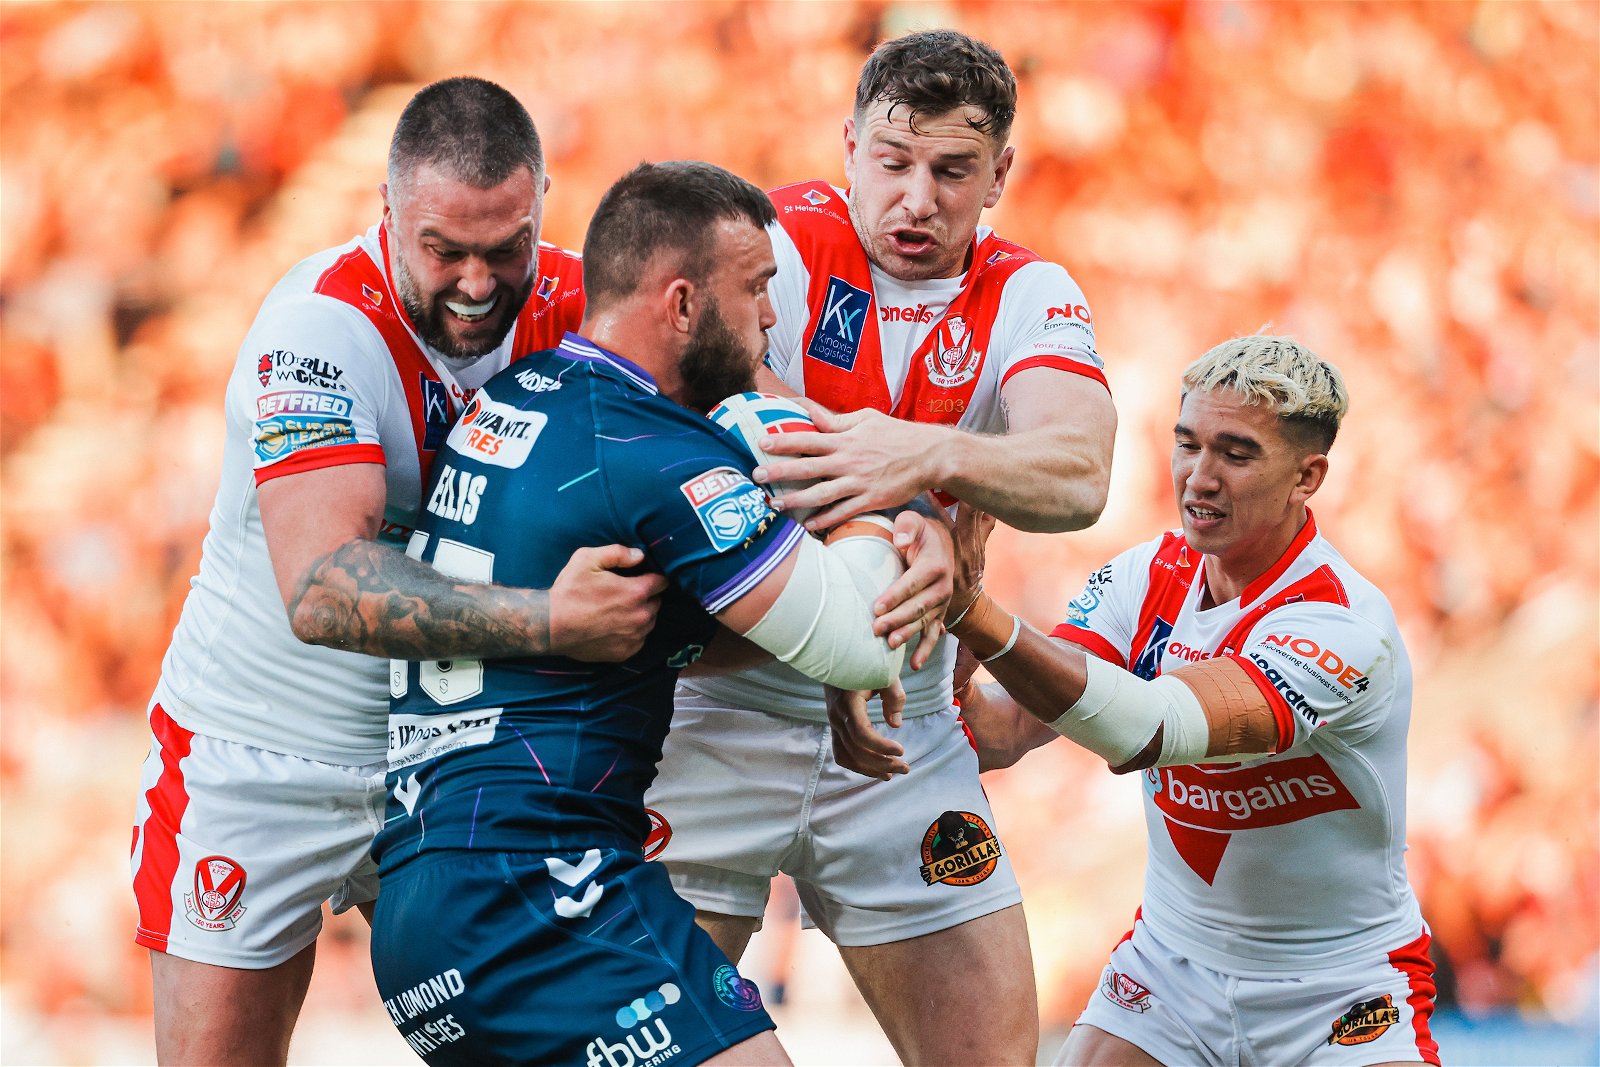 Wigan’s Kaide Ellis is tackled by St Helens’ Curtis Sironen, Mark Percival and Tee Ritson.